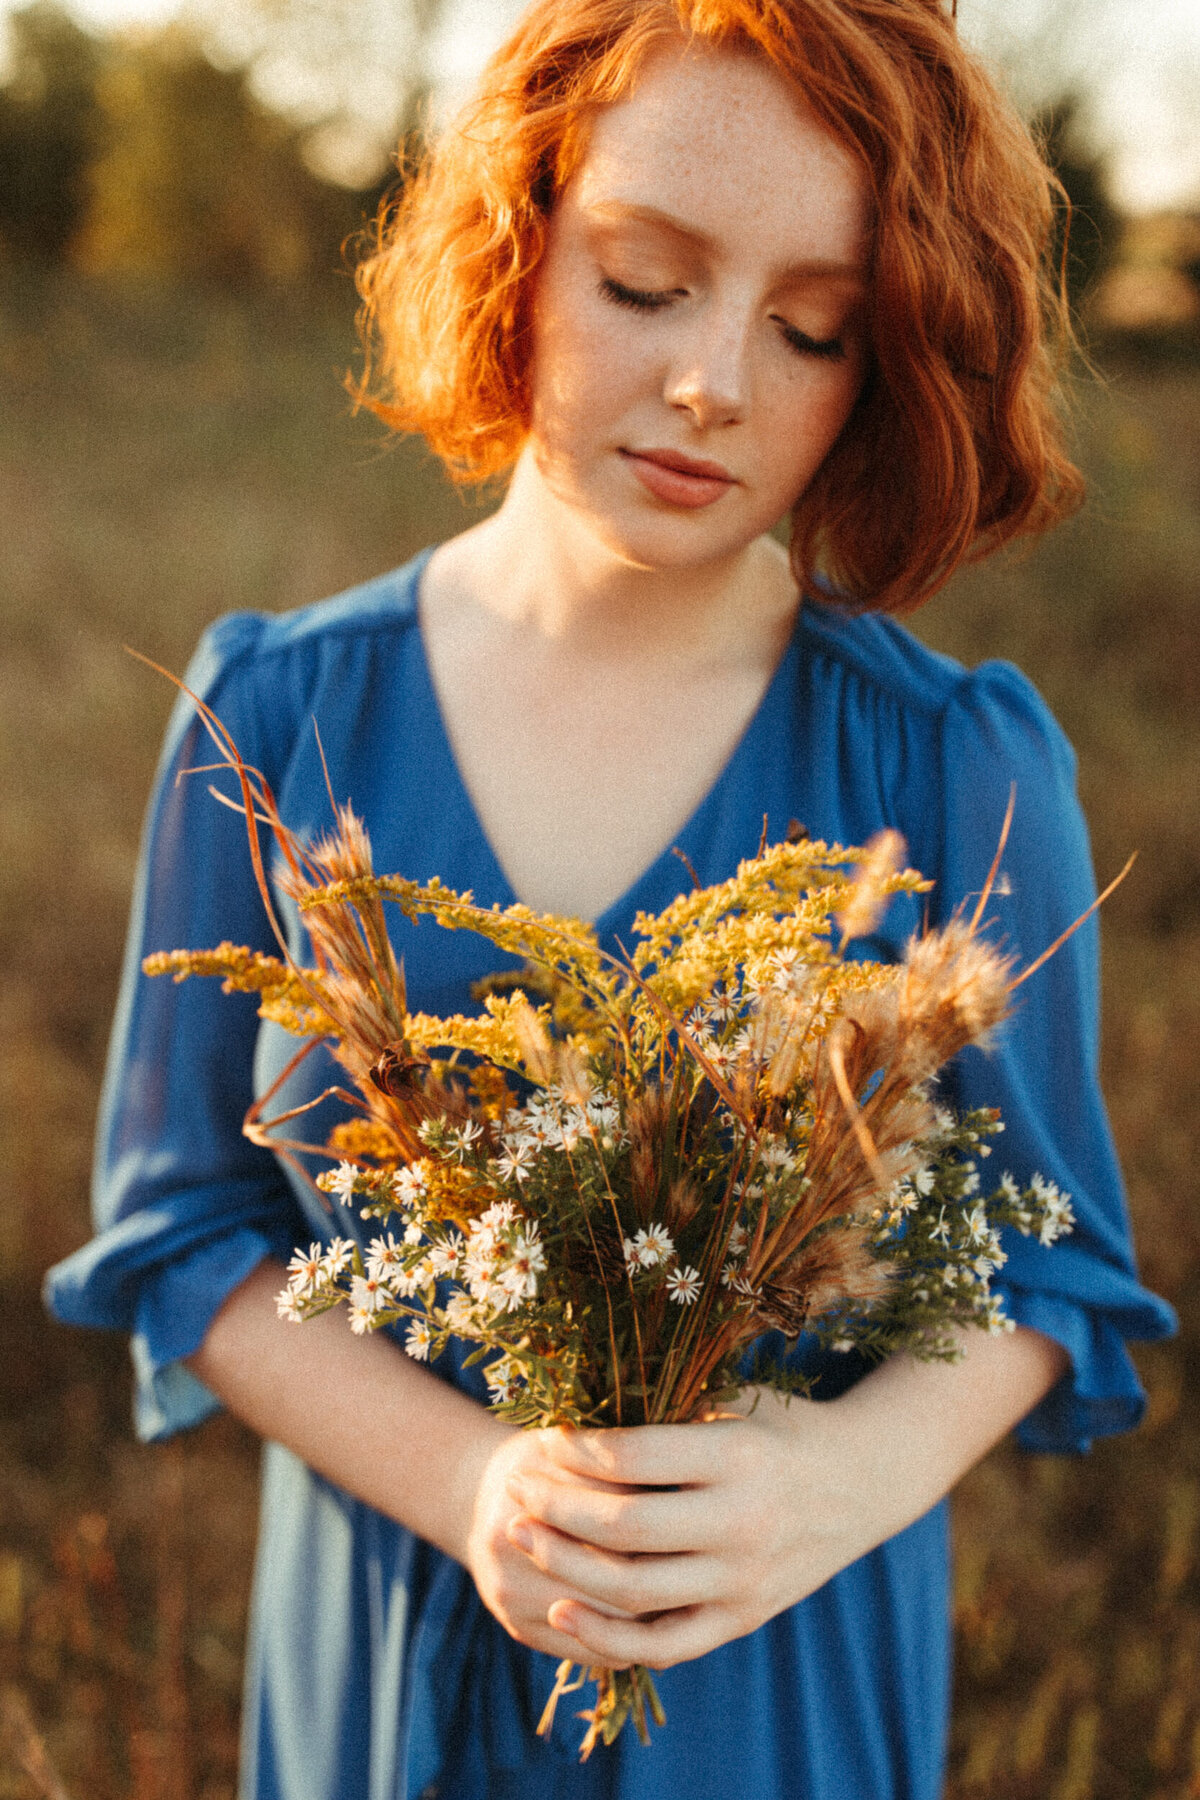 Girl senior holding a bundle of wildflowers she picked from a field during her photoshoot